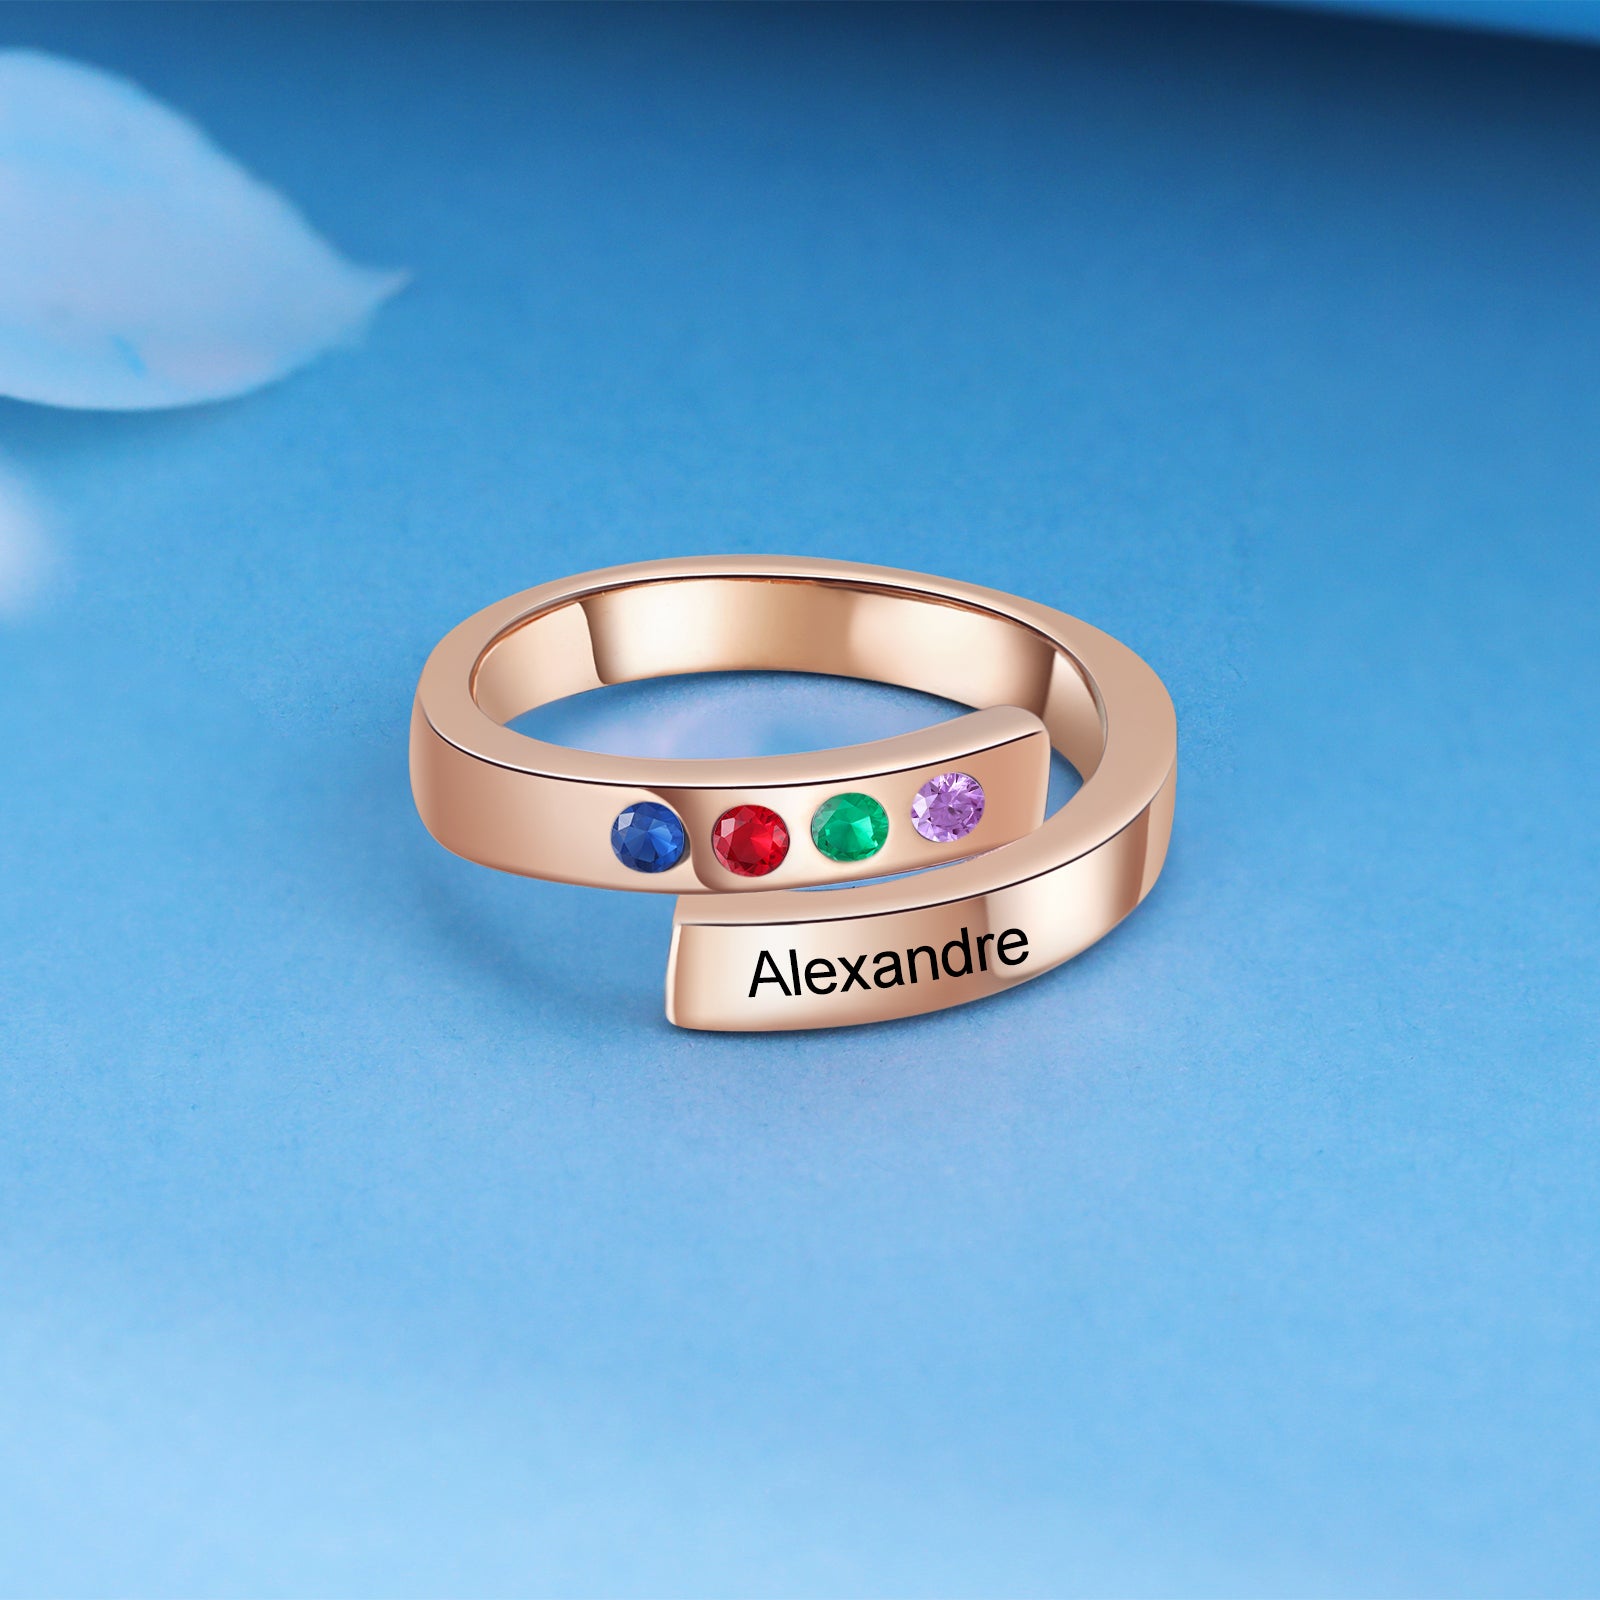 Personalized Engraved Name and Birthstone Ring. Great gift For Mom or Grandma. 2-4 Stones